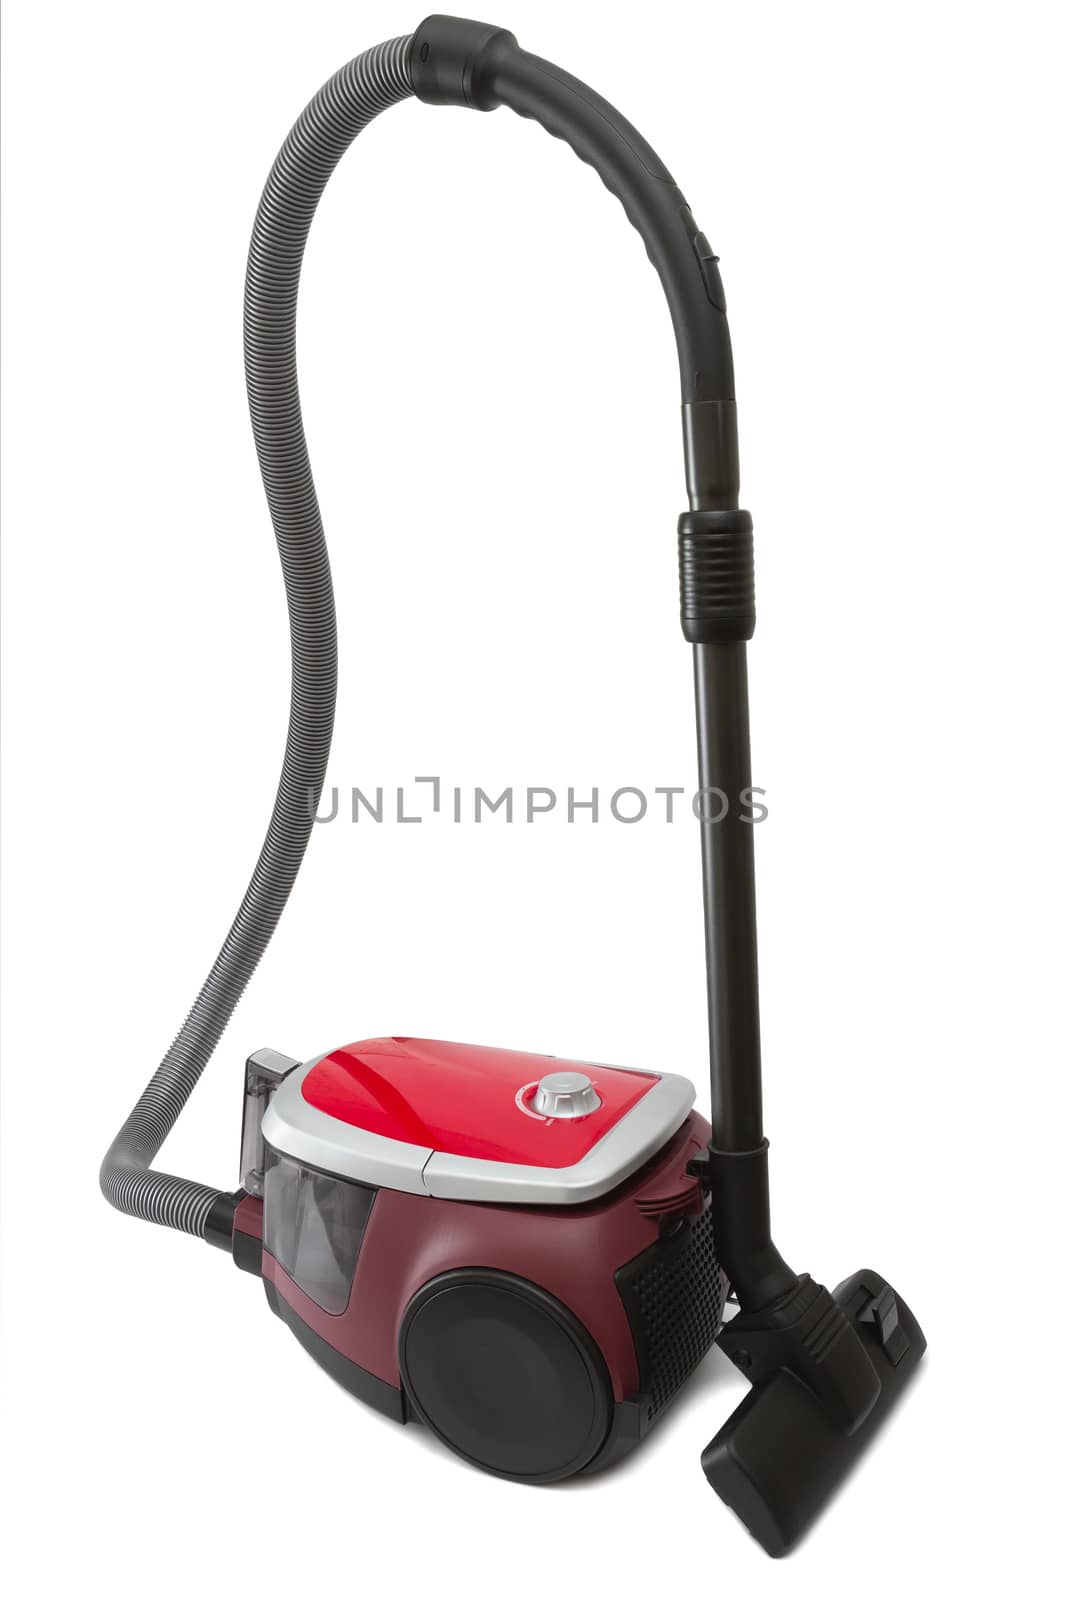 Vacuum cleaner isolated on white background
